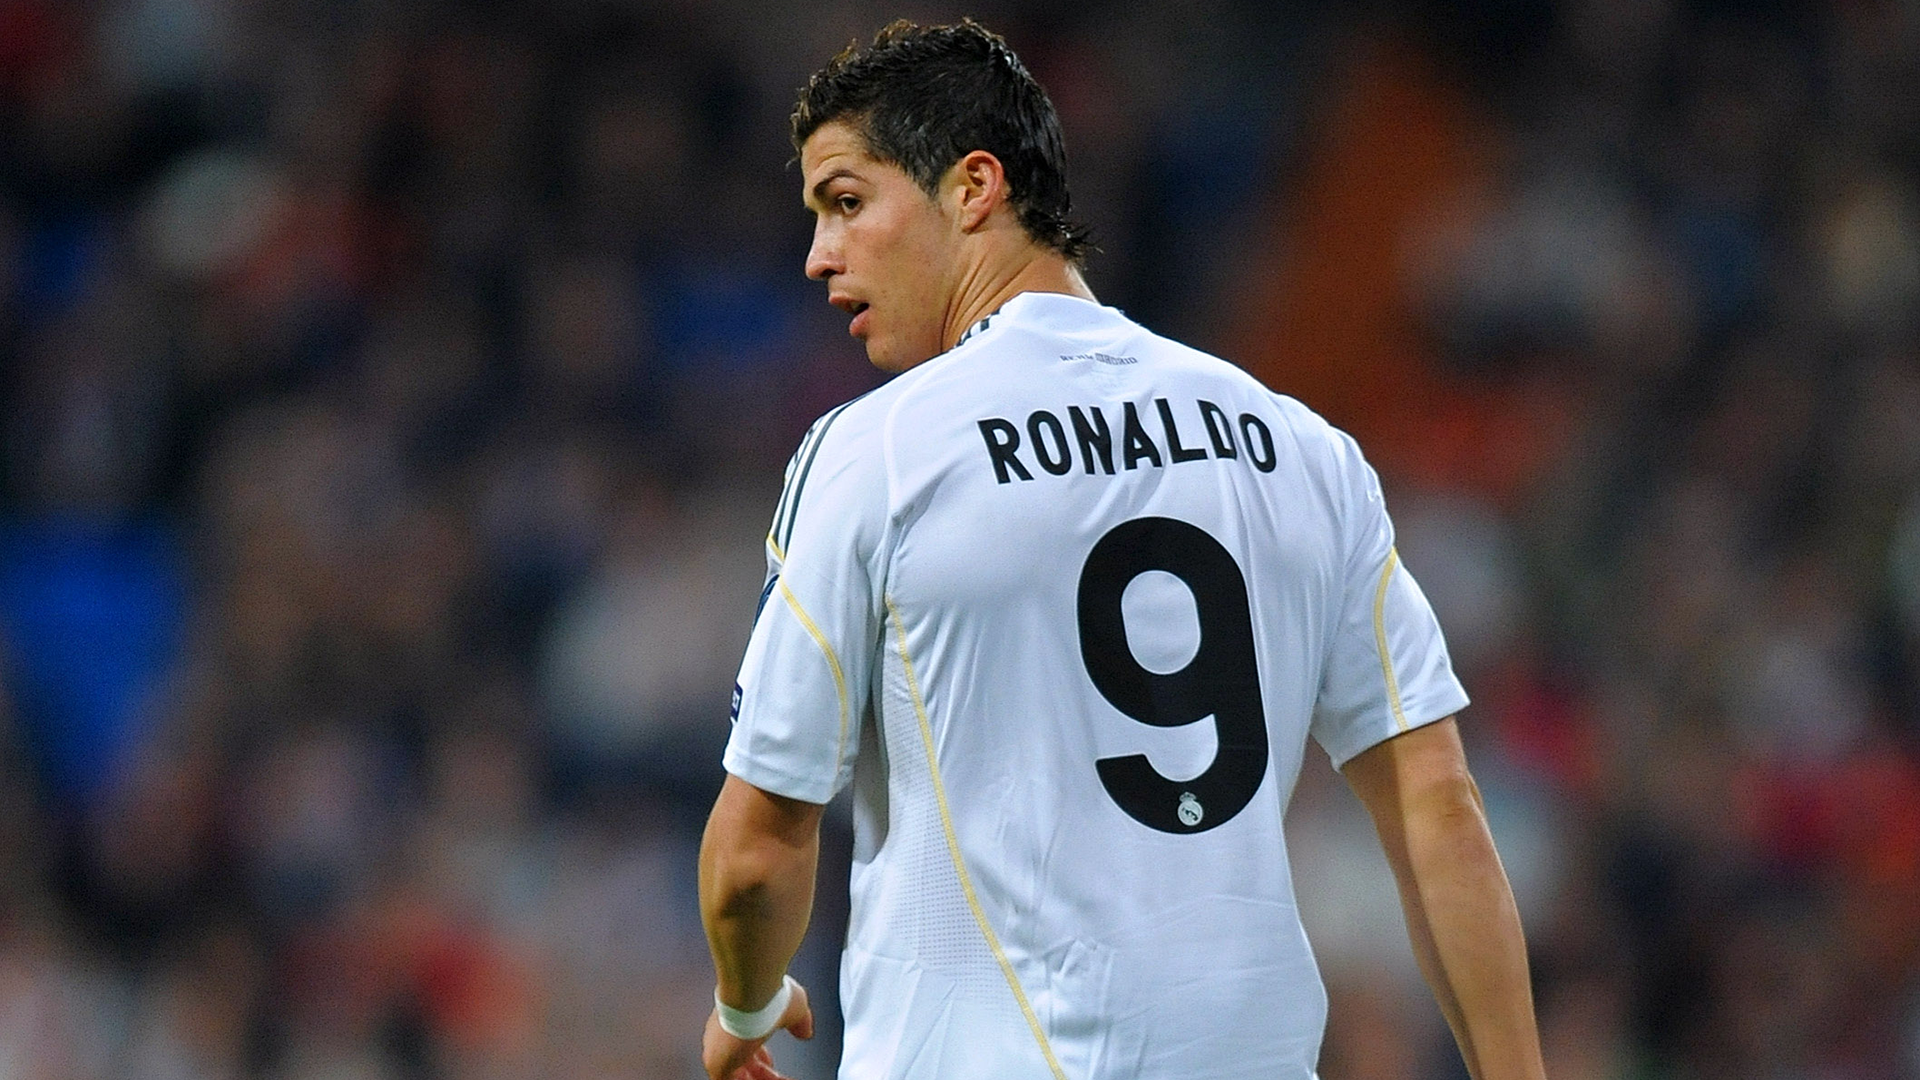 Cristiano Ronaldo: Why Is The No.7 Jersey So Important To Him?